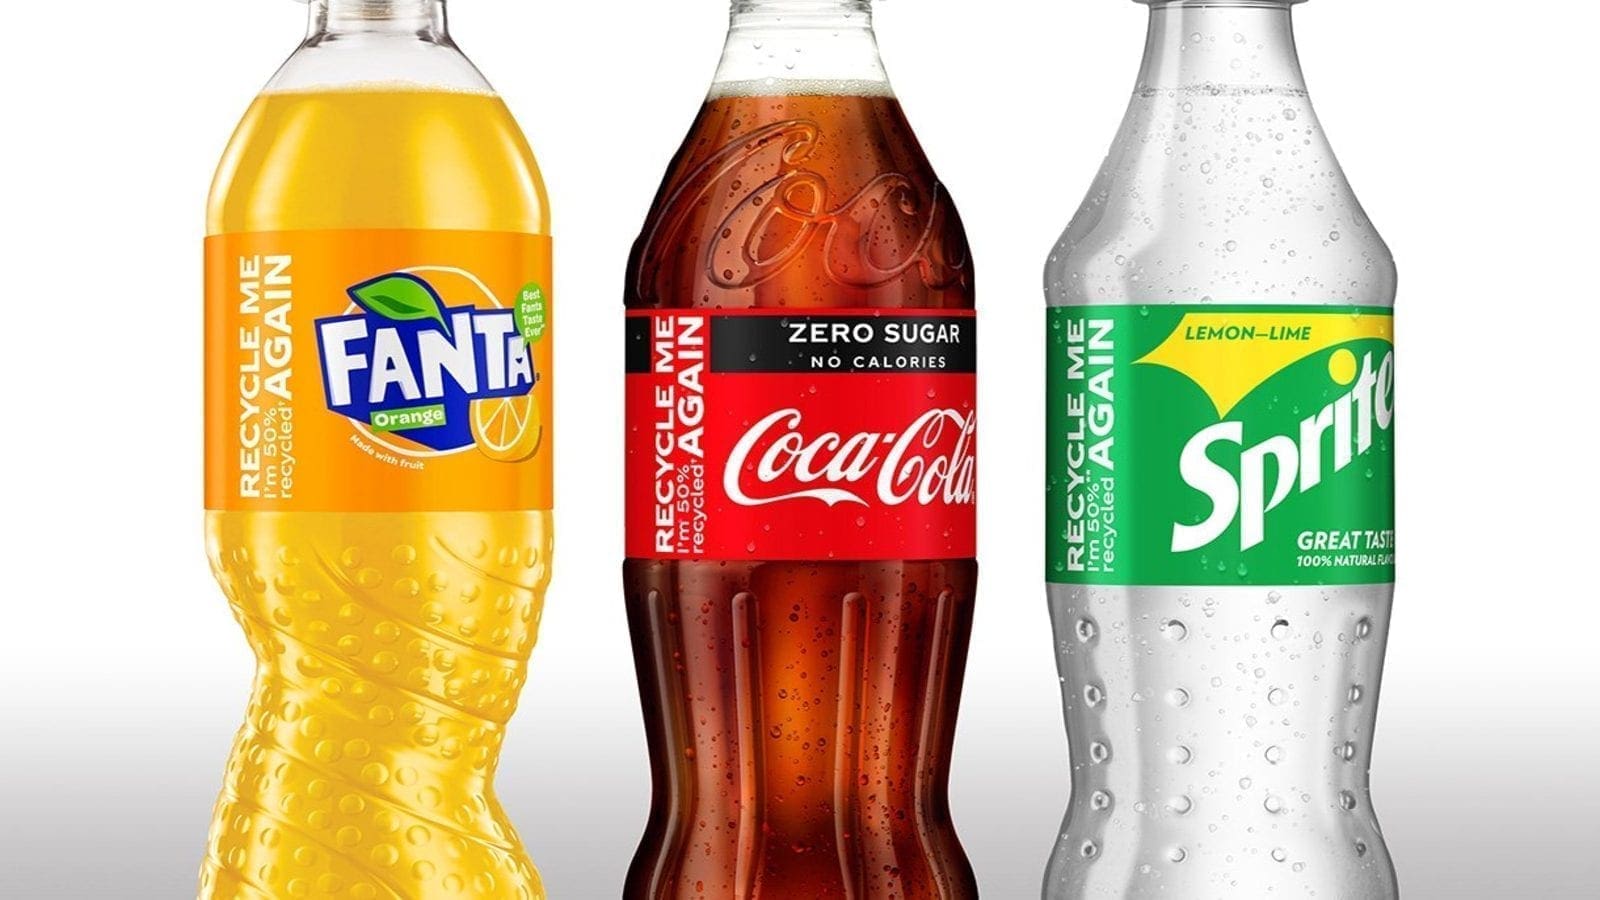 Coca-Cola transitions to 100% rPET bottles in UK as PepsiCo Europe commits to slash 25% sugar levels in sodas